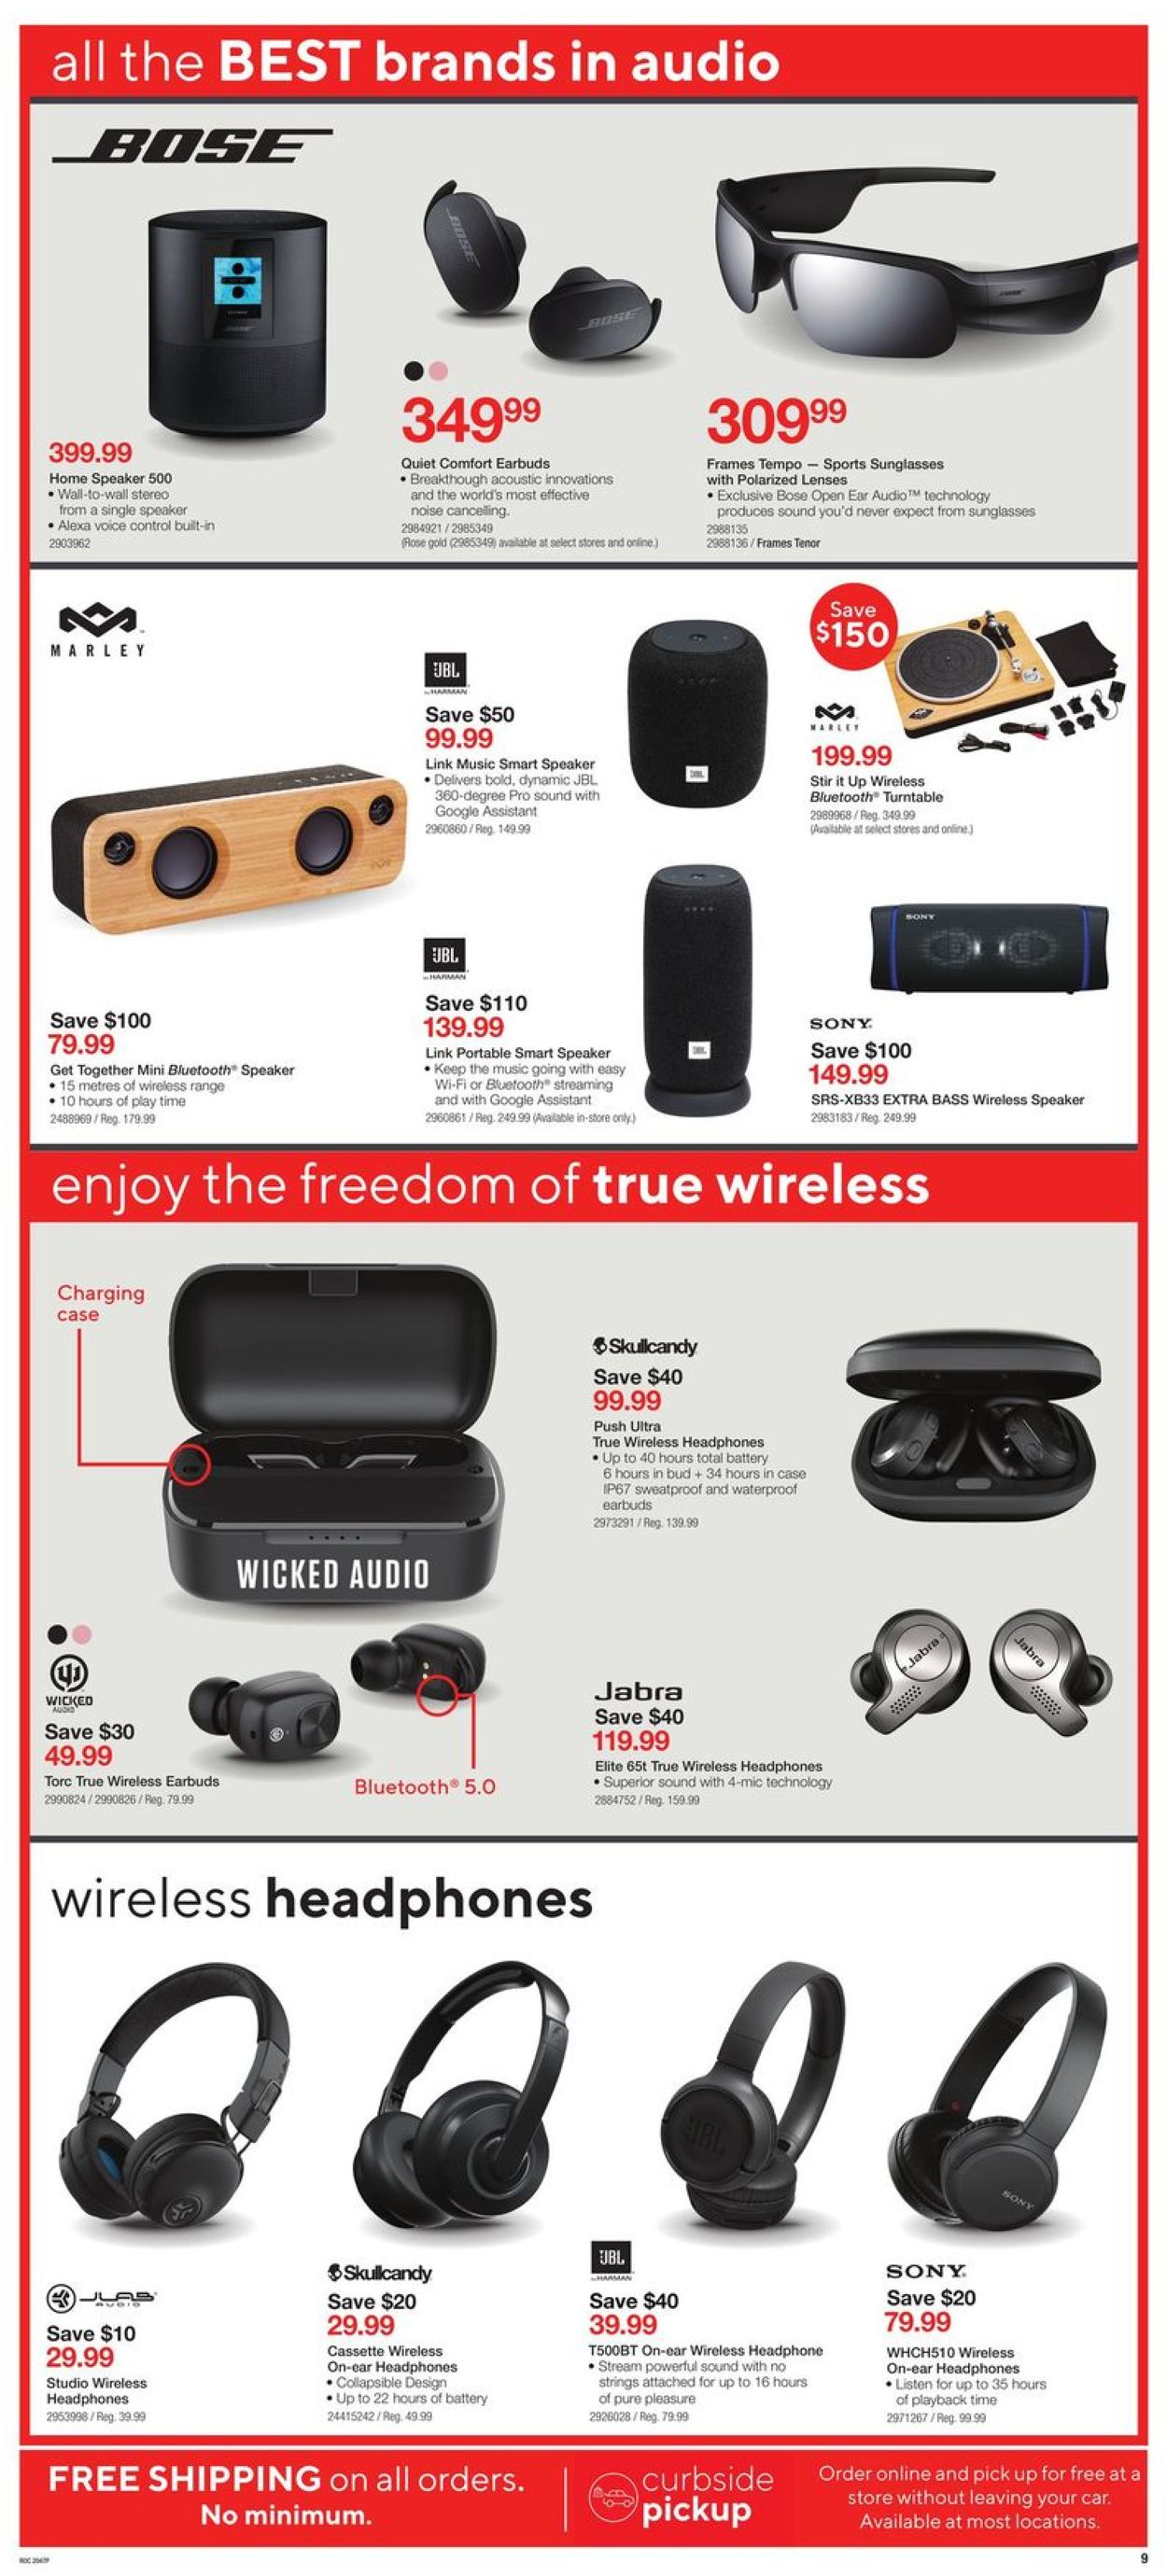 Staples Flyer from 12/25/2020